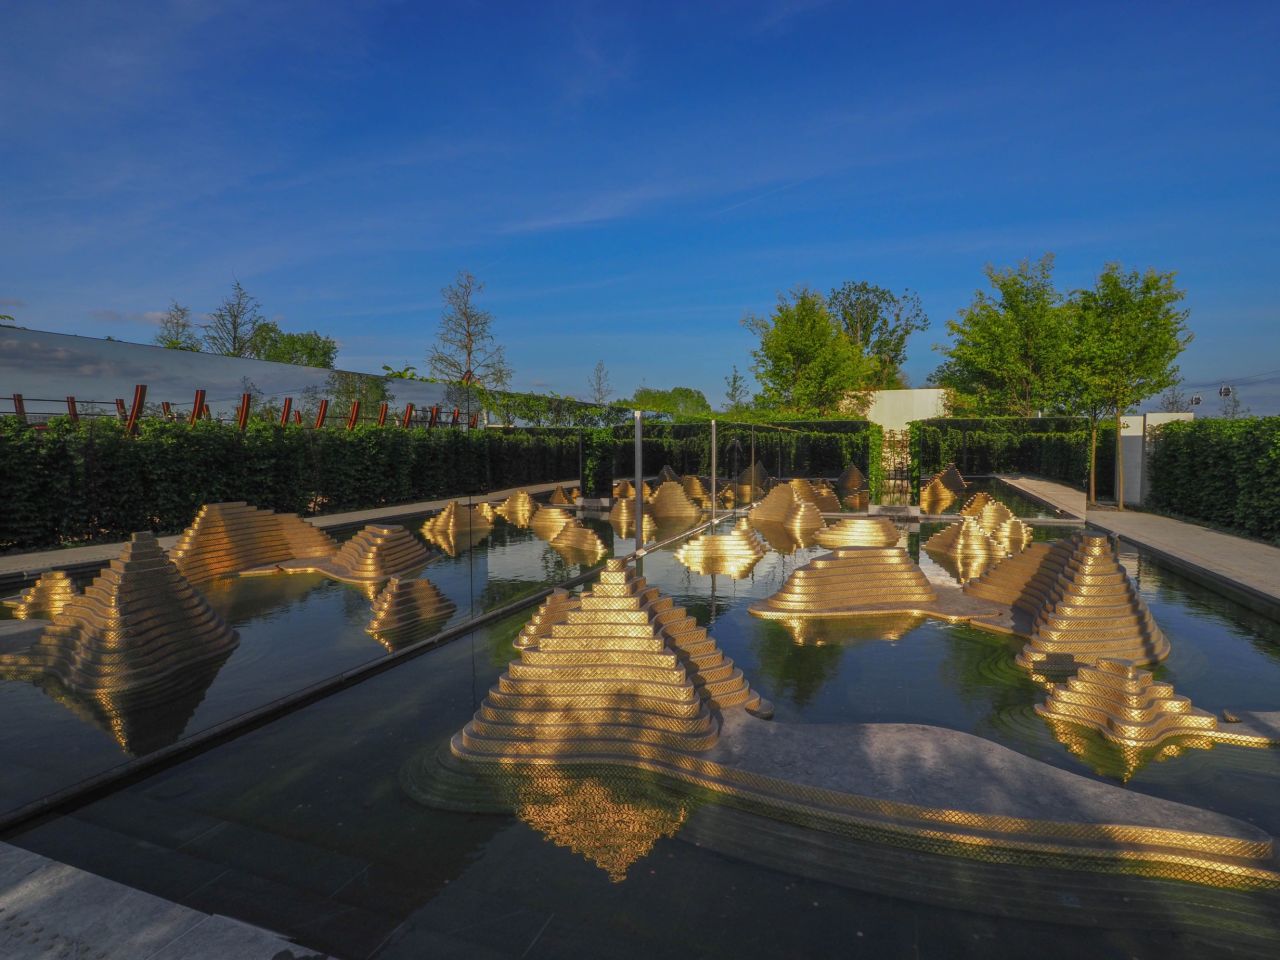 Designed by the Thai Landscape Architecture firm PLandscape, the Garden of the Mind is inspired by the country's culture and landscapes. 